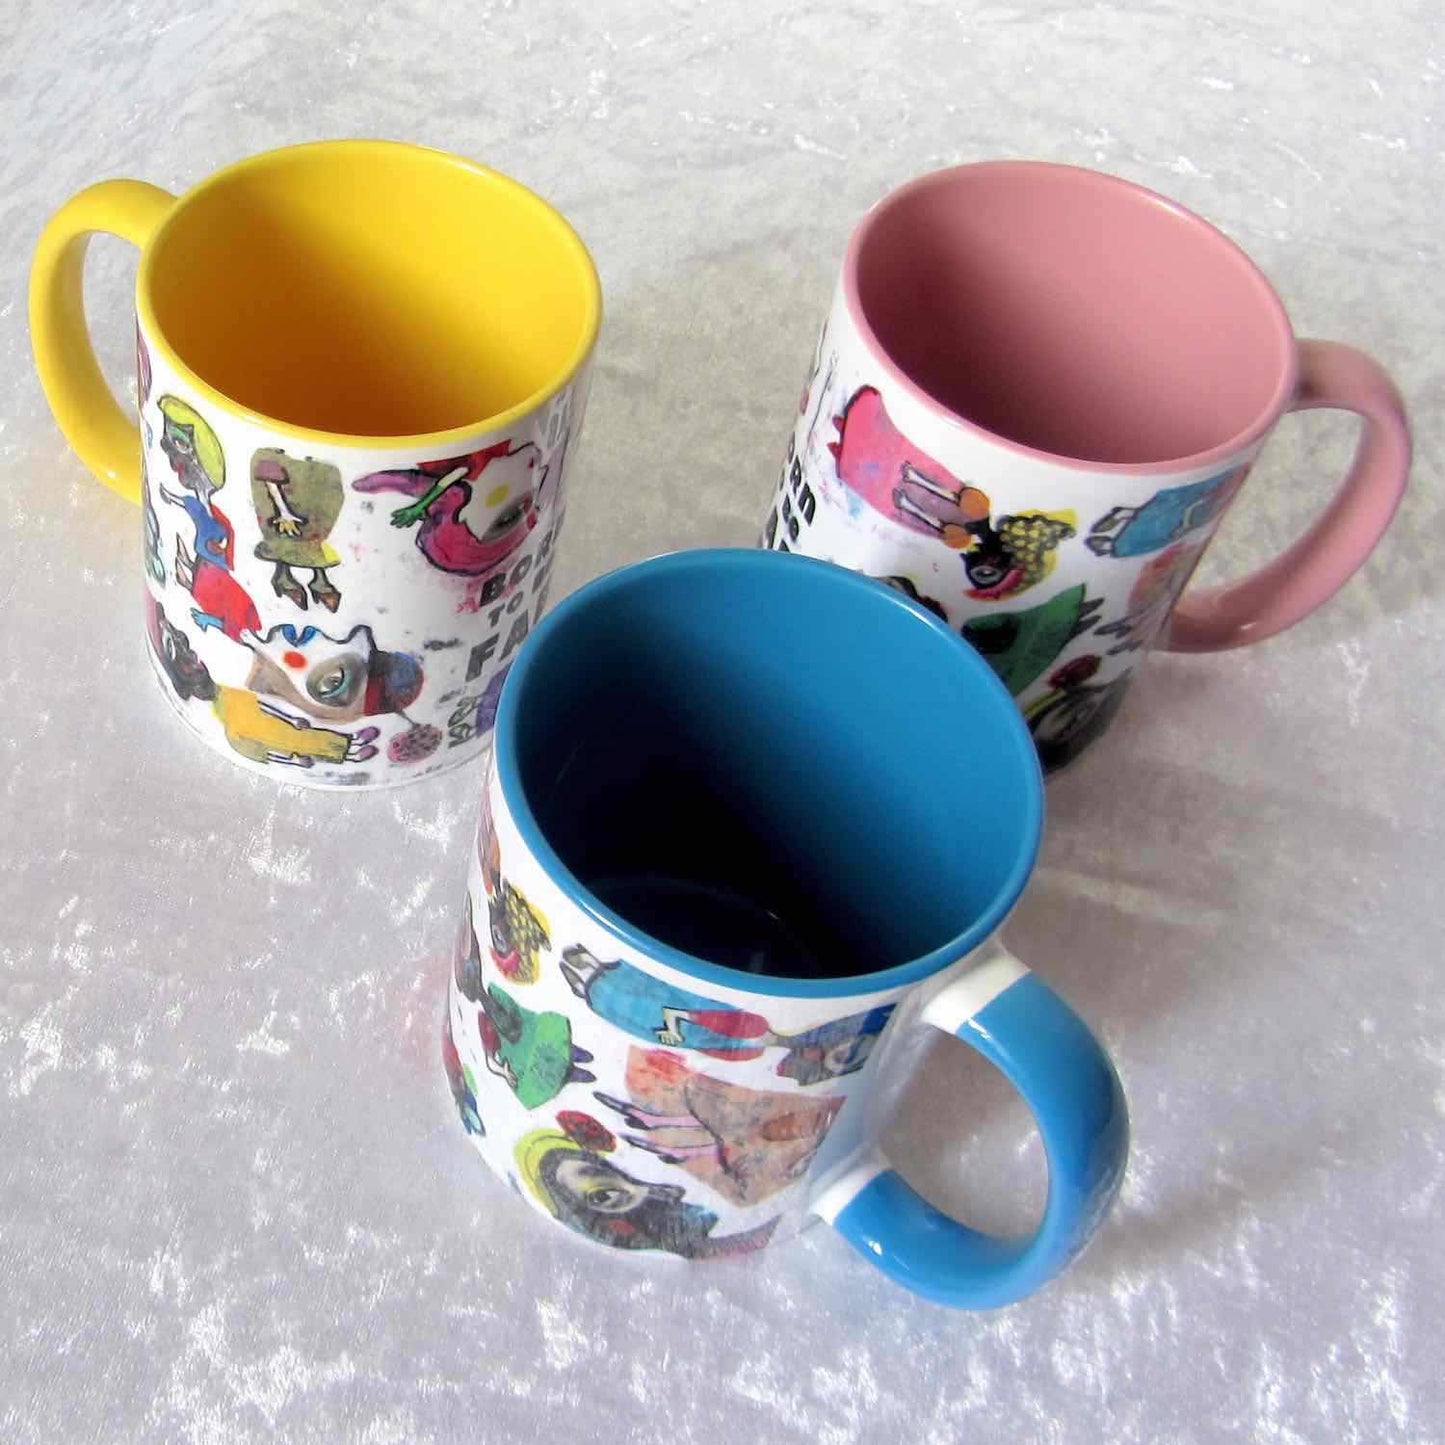 Graphic coffee mugs with pink, blue, and yellow accent colors on rim, handle and interior. Colorful Fab Ladies design.